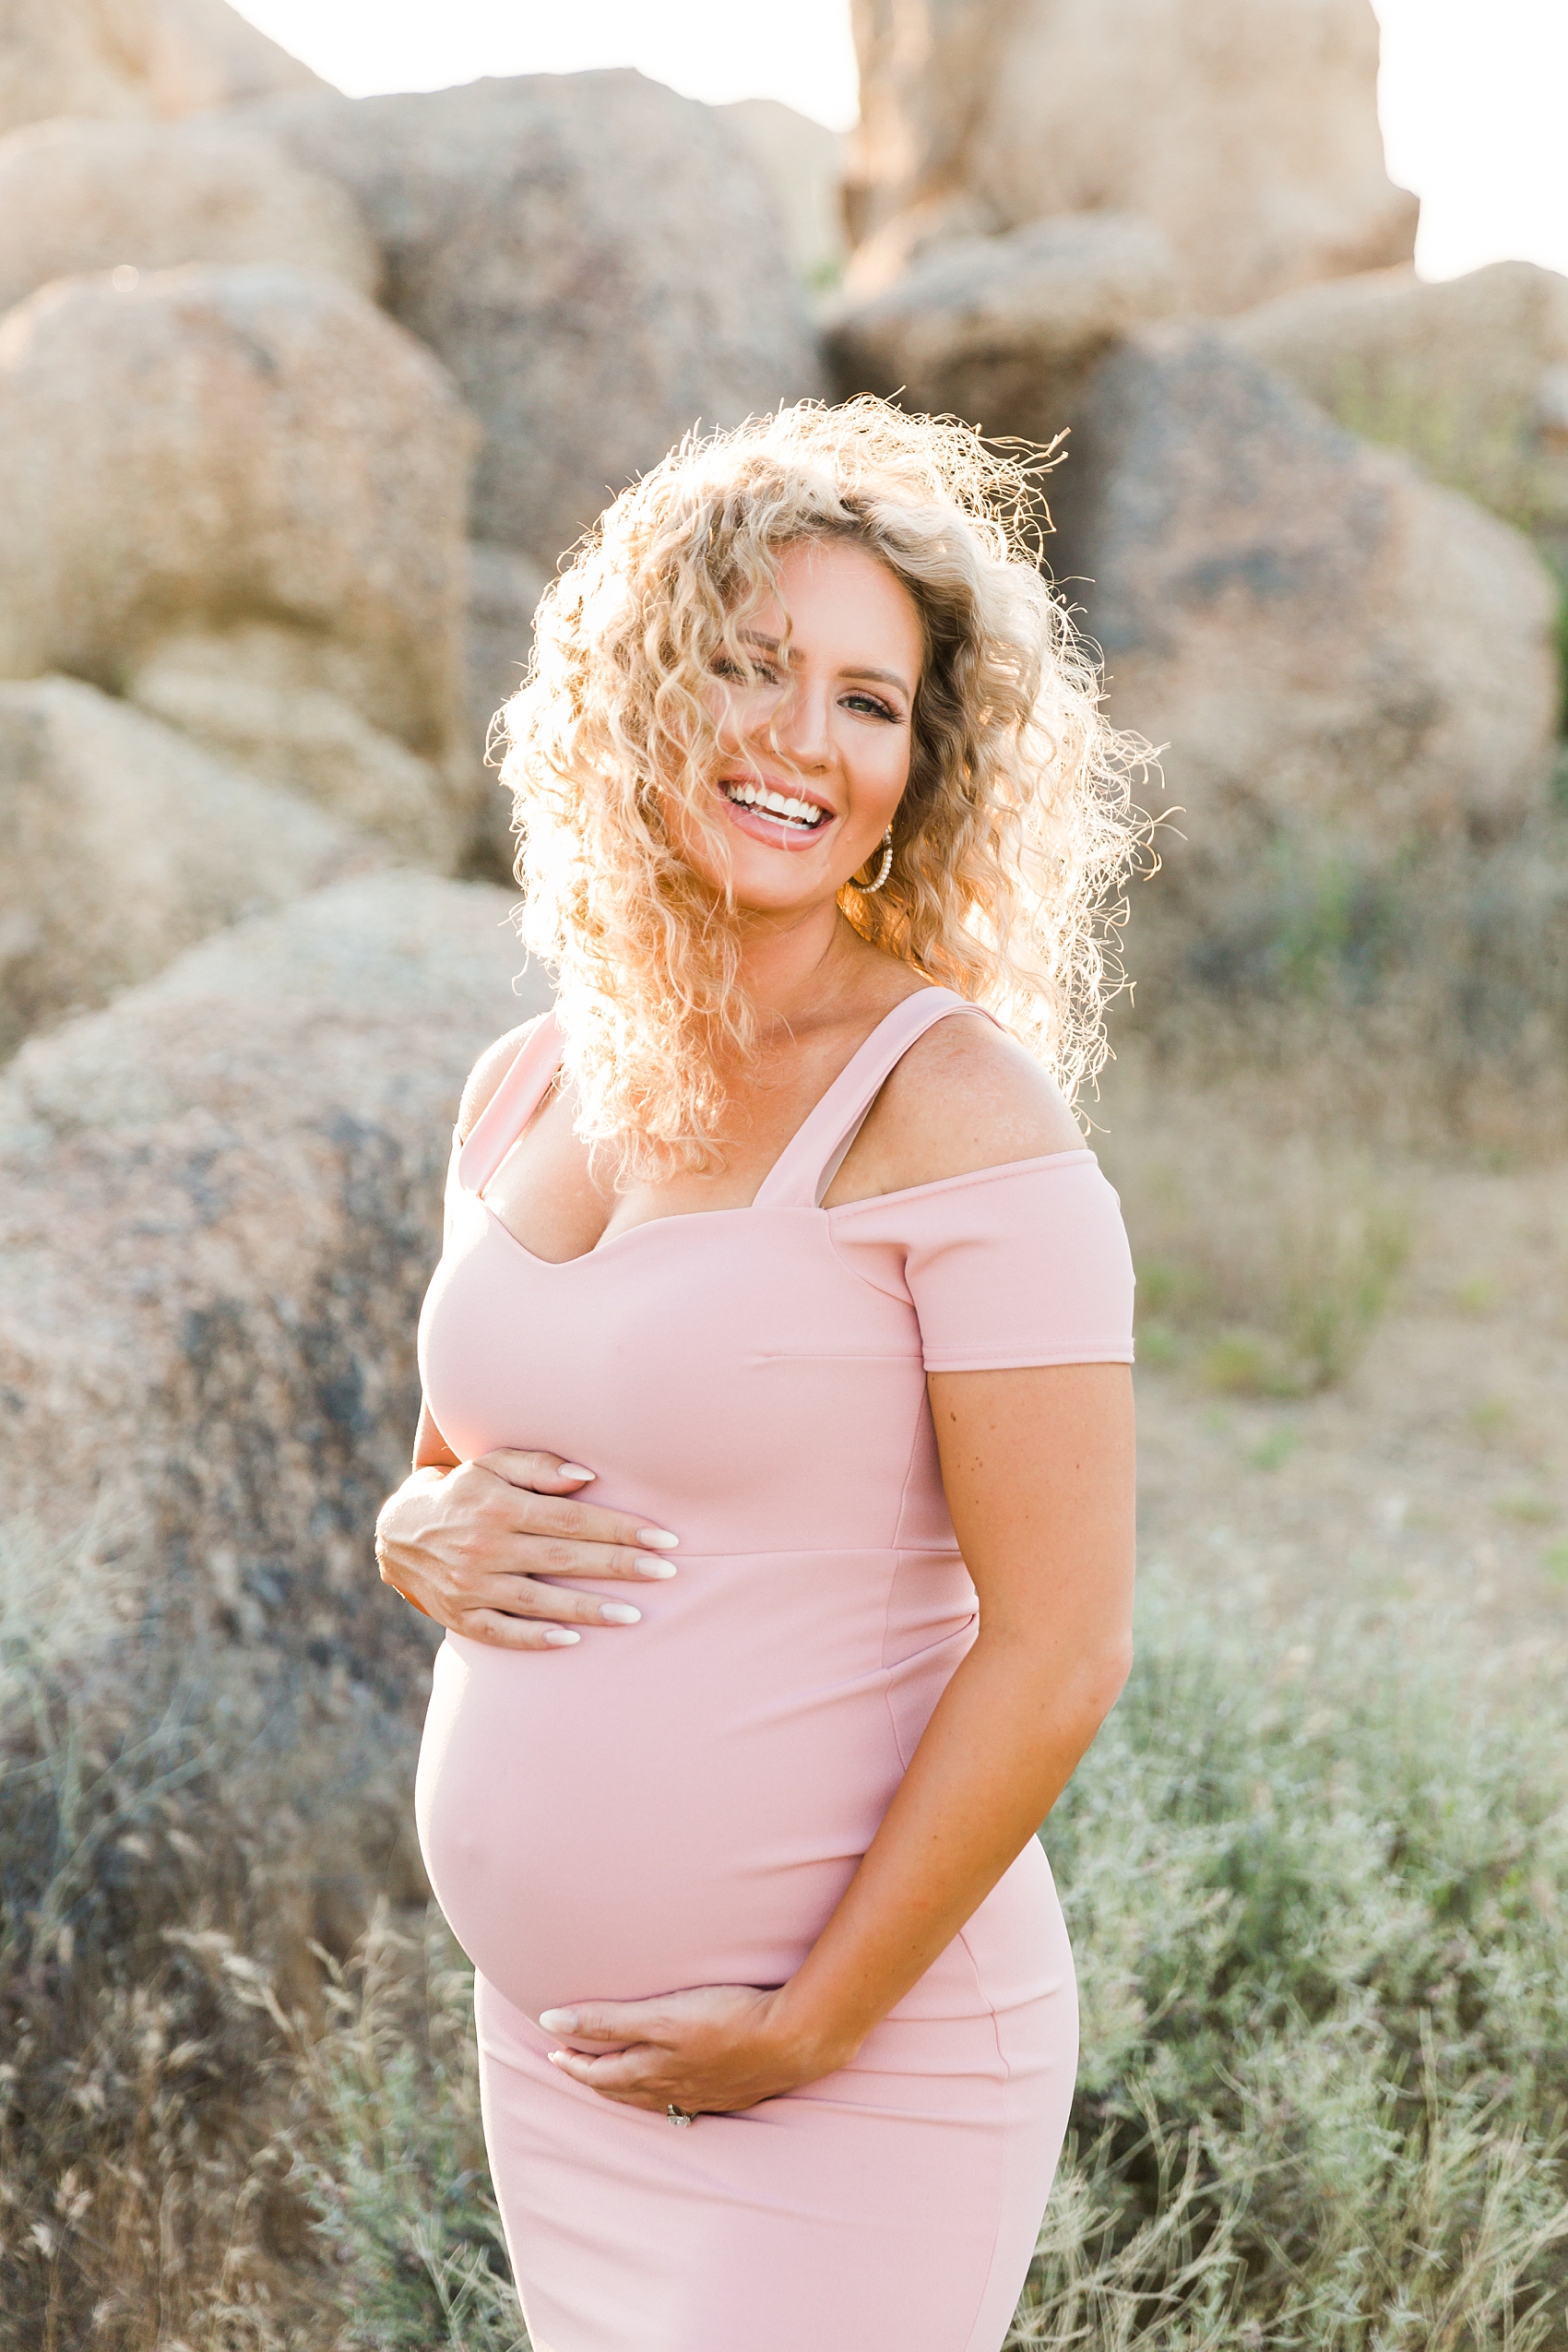 Leah Hope Photography | Scottsdale Phoenix Arizona | Desert Landscape Cactus Boulders Scenery | Sunset Natural Light | What to Wear | How to Pose | Maternity Poses | Styling Fashion for Pictures | Maternity Photos | Bump Pictures | Pregnancy Photos | Baby Bump